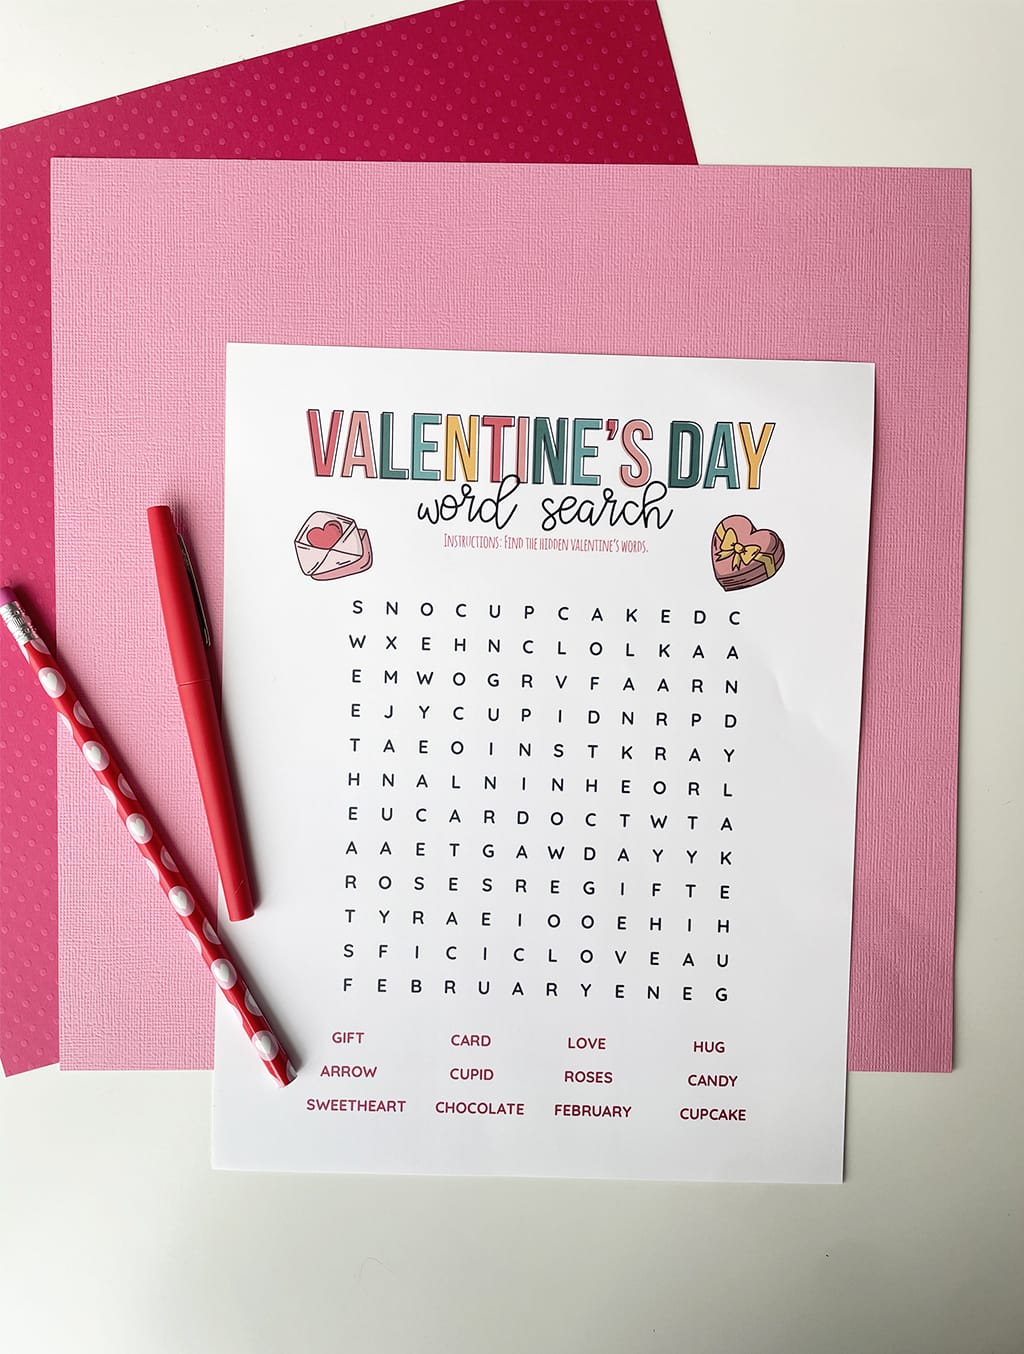 Valentines Day Word Search Printable Game printed out and placed on a dark pink and light pink paper backdrop. With a red fineline marker and valentine pencil.